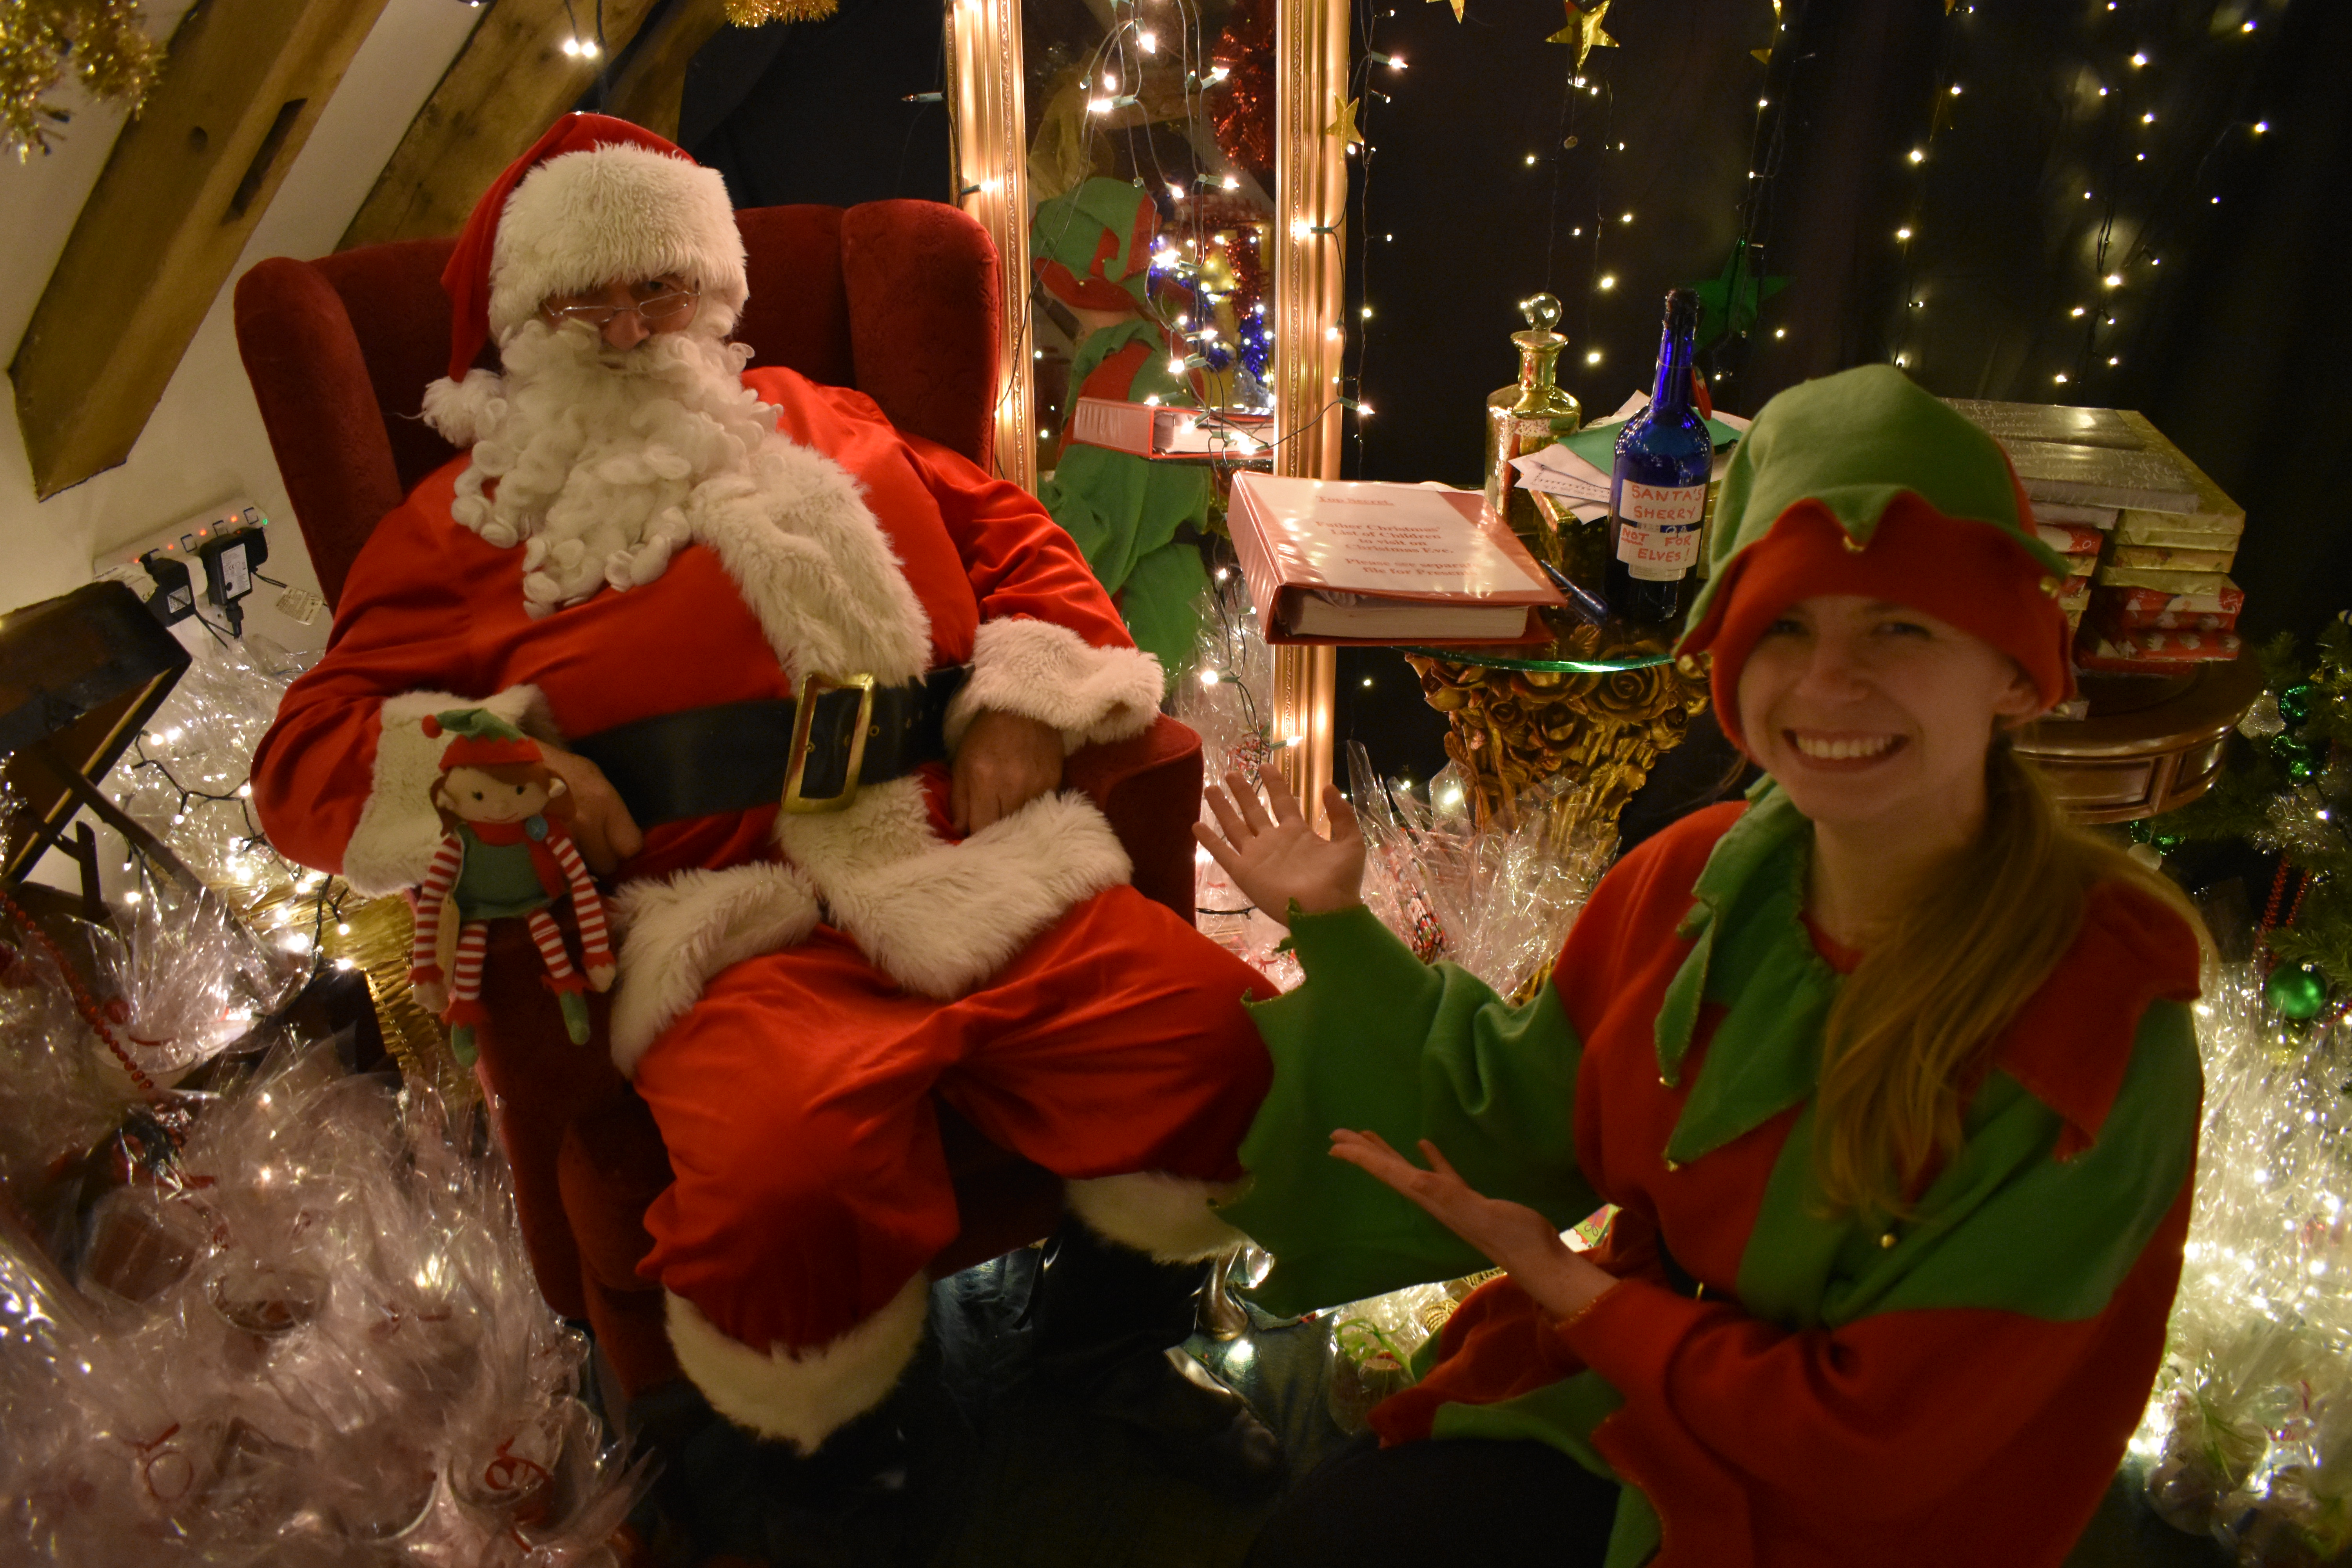 Working as an elf in Santa's grotto